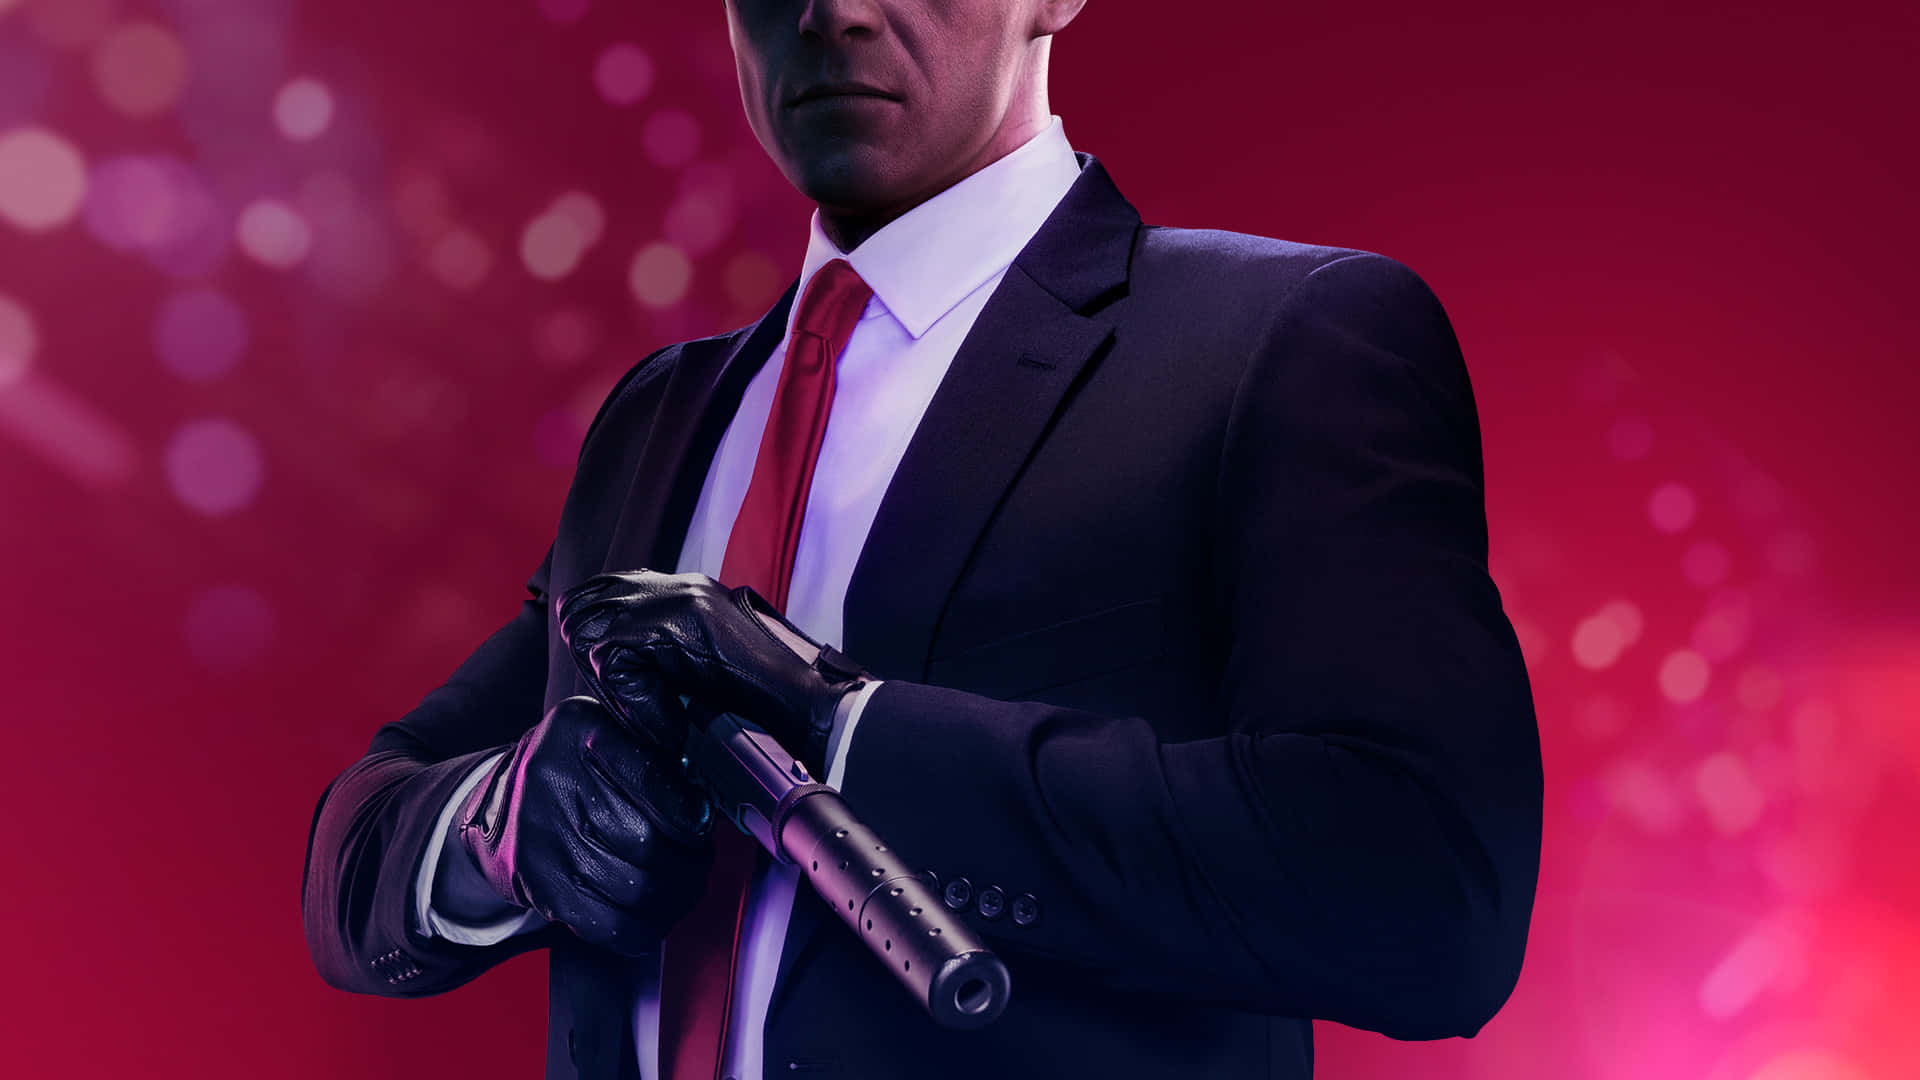 The law of the land is in your hands in HD Hitman Absolution.